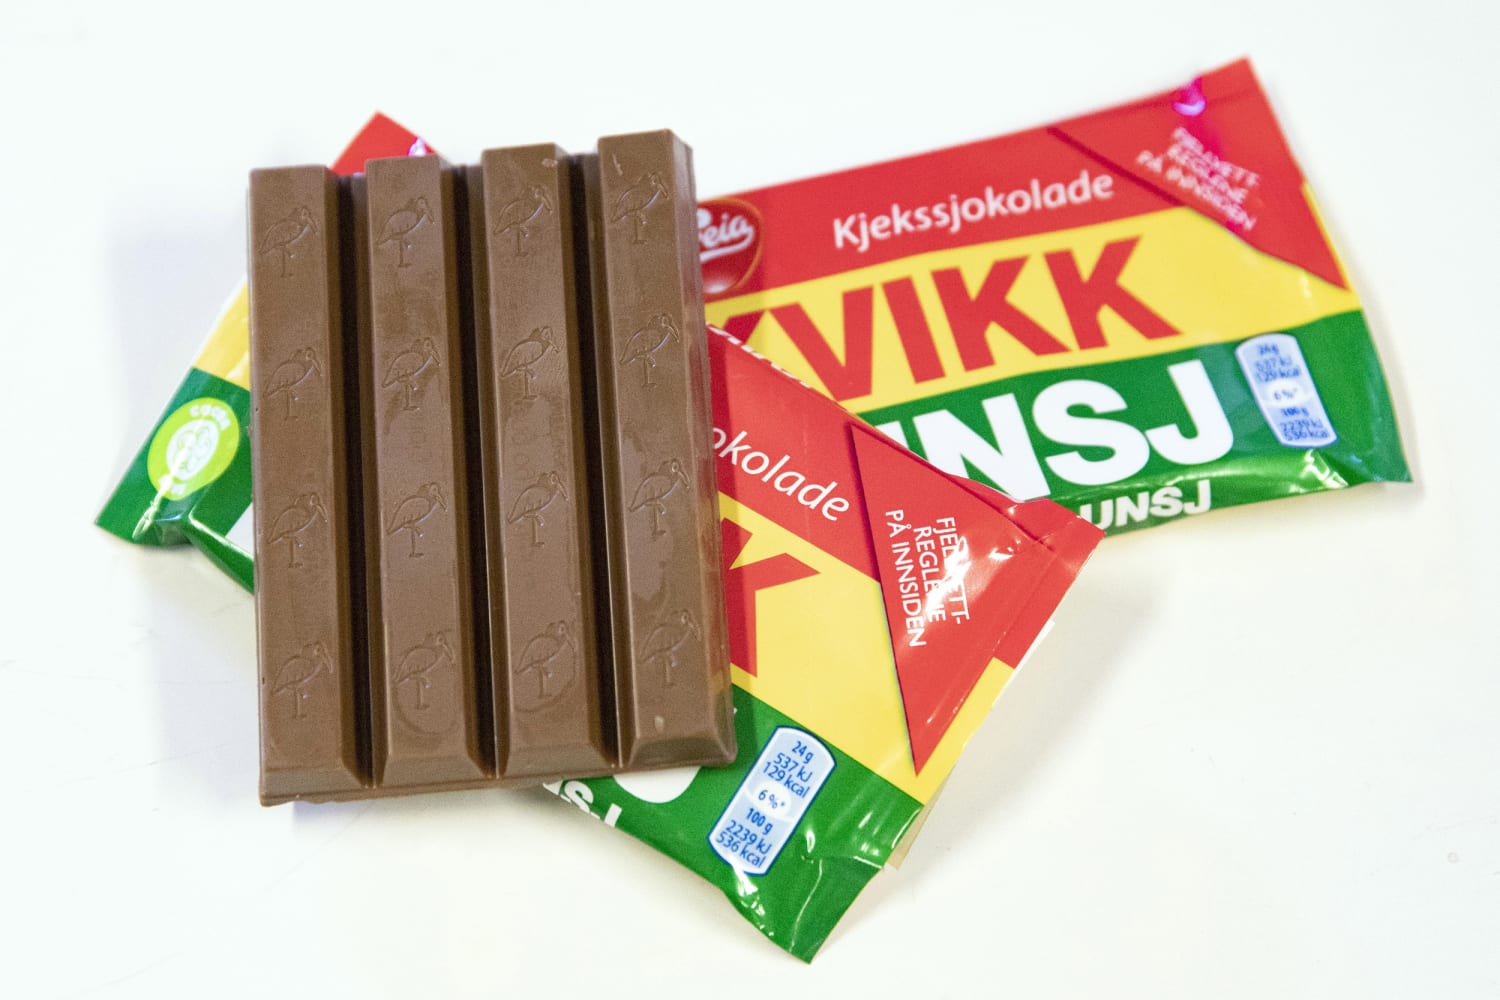 Does Kit Kat's Shape Deserve a Trademark? E.U. Adds a Hurdle. - The New  York Times